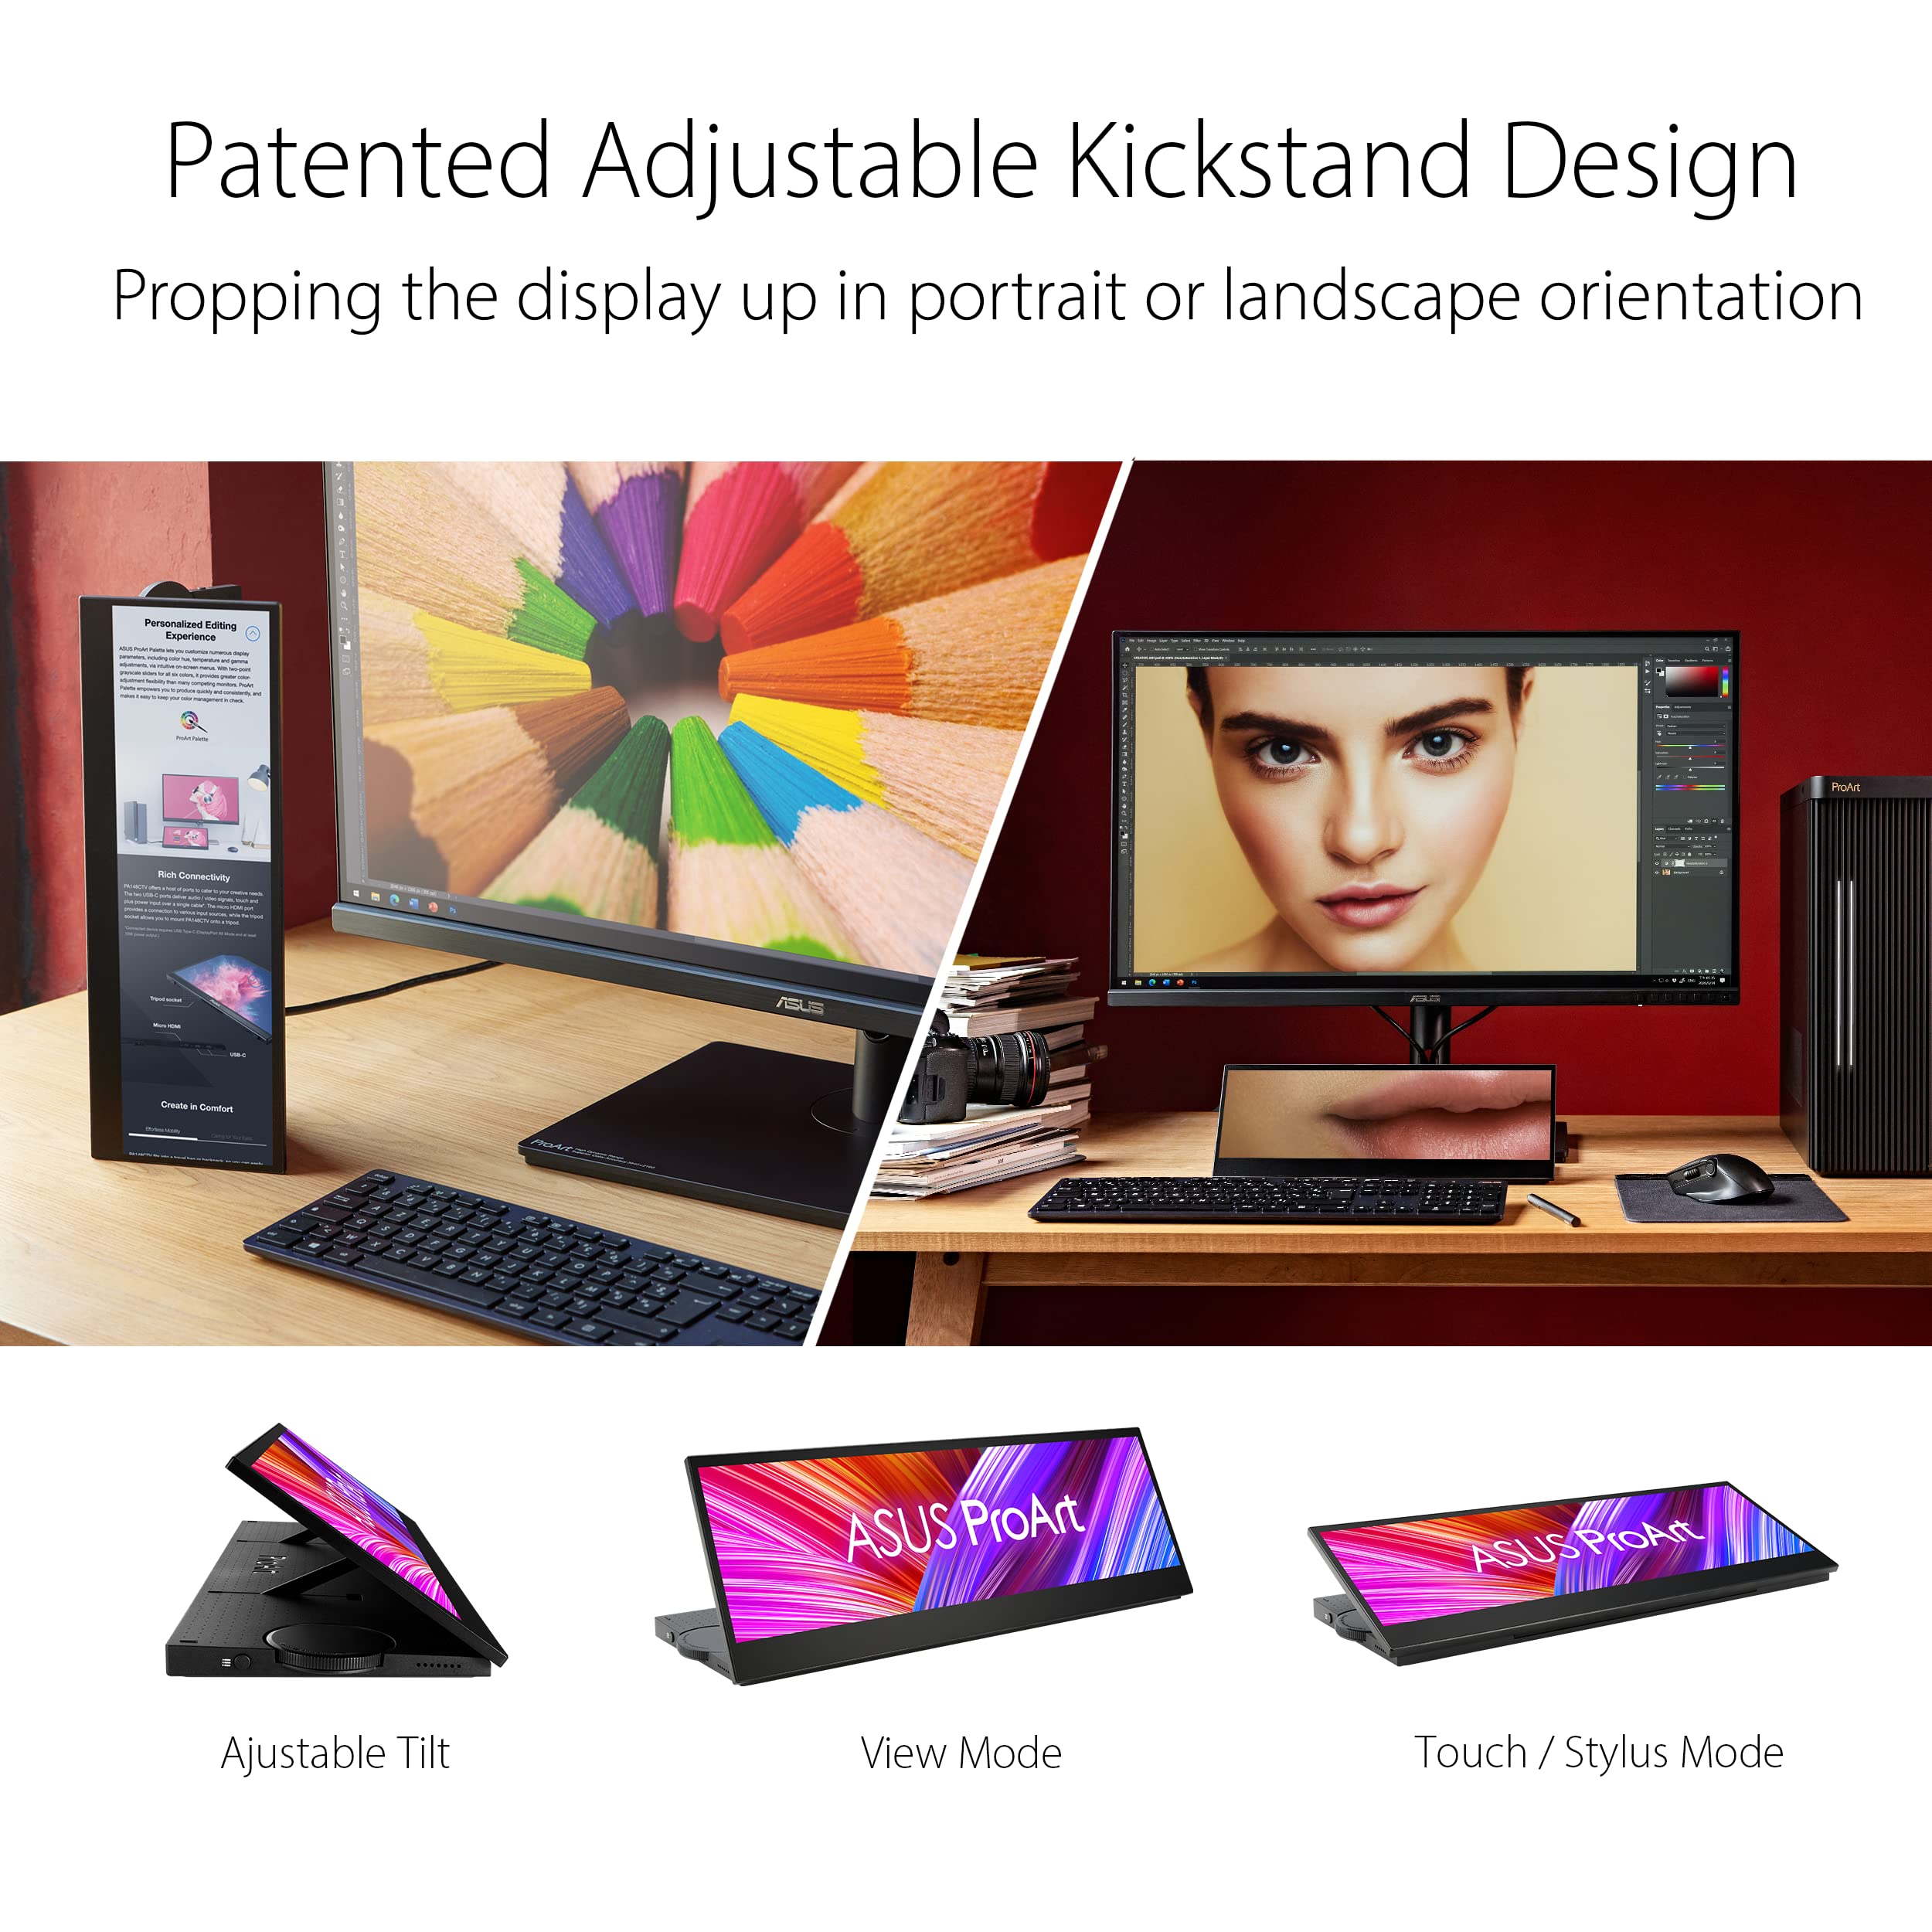 ASUS ProArt Display 14” Portable Touch Screen (PA147CDV) - 32:9 (1920 x 550), IPS, 100% sRGB, Color Accuracy ΔE  2, Calman Verified, USB-C, Control Panel, MPP2.0 Pen support, Adobe Suite Shortcut